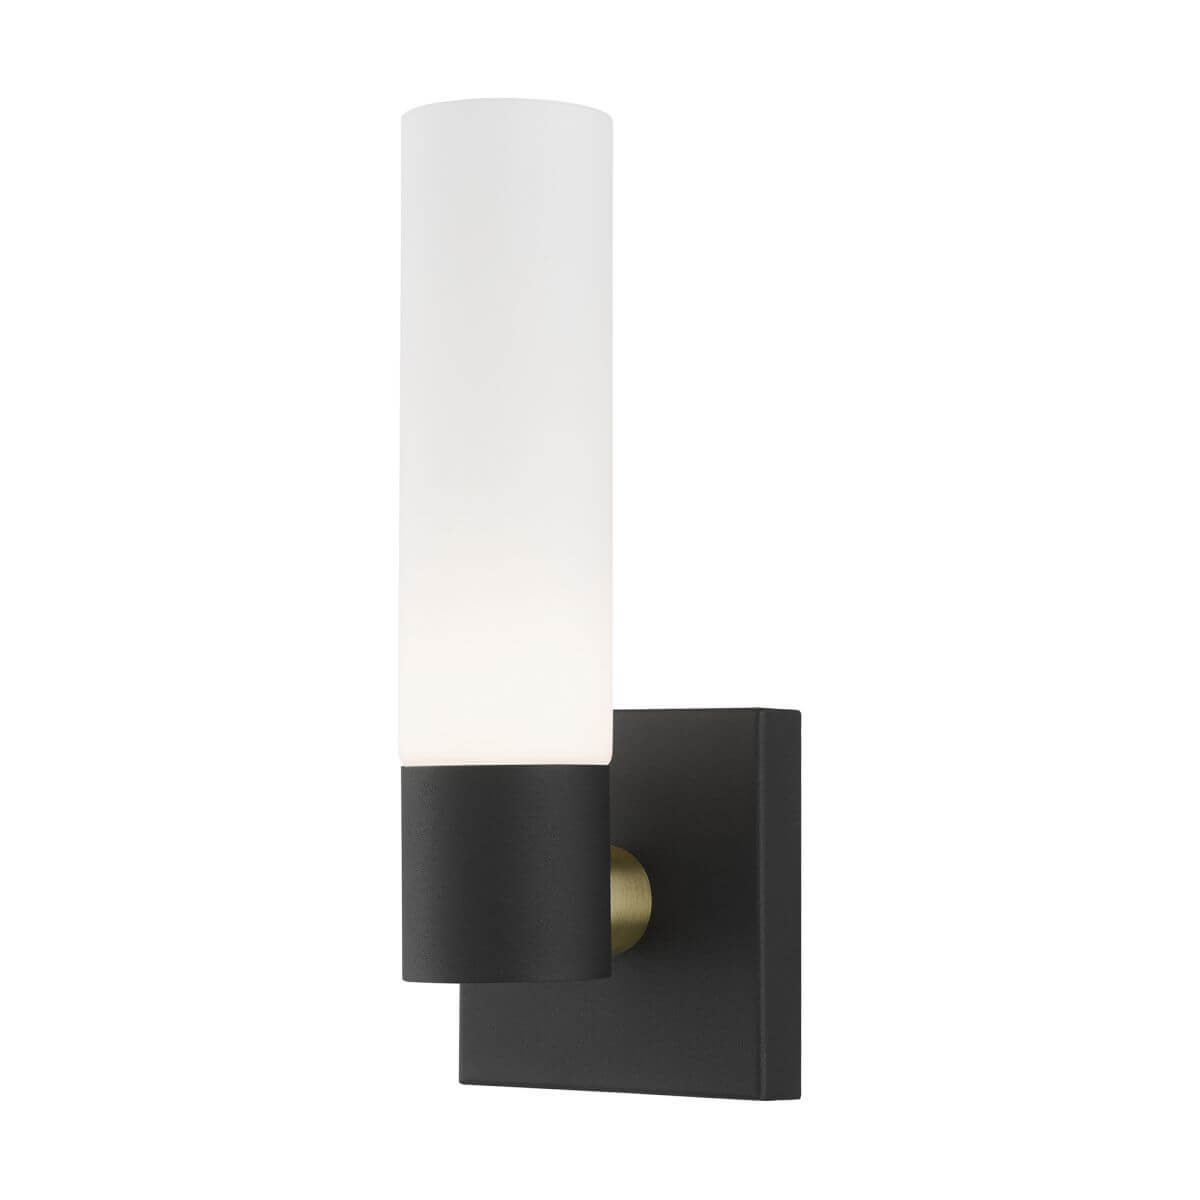 Livex 10101-14 Aero 1 Light 11 inch Tall Wall Sconce in Textured Black-Antique Brass Accent with Hand Blown Satin Opal White Twist Lock Glass